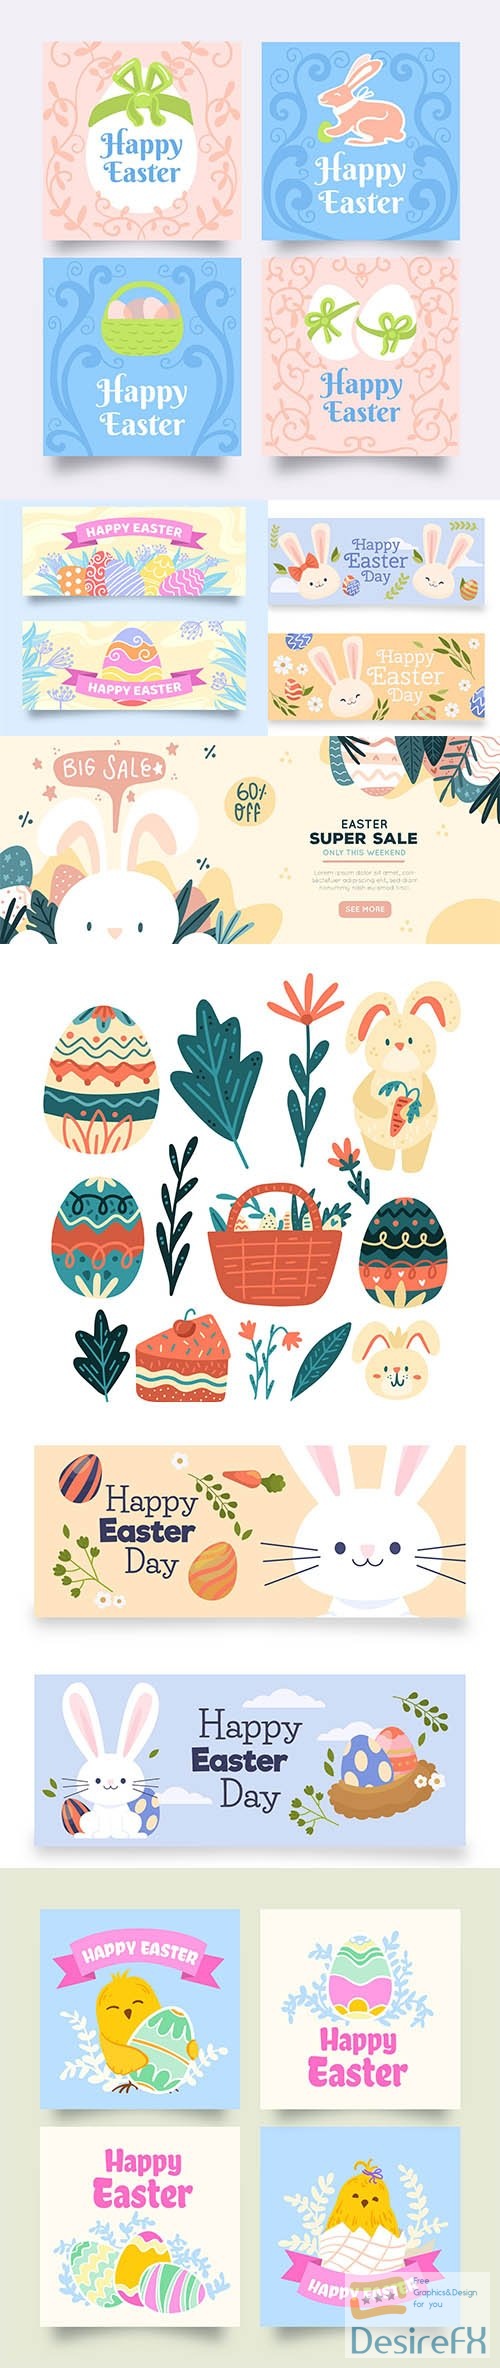 Hand-drawn easter element collection